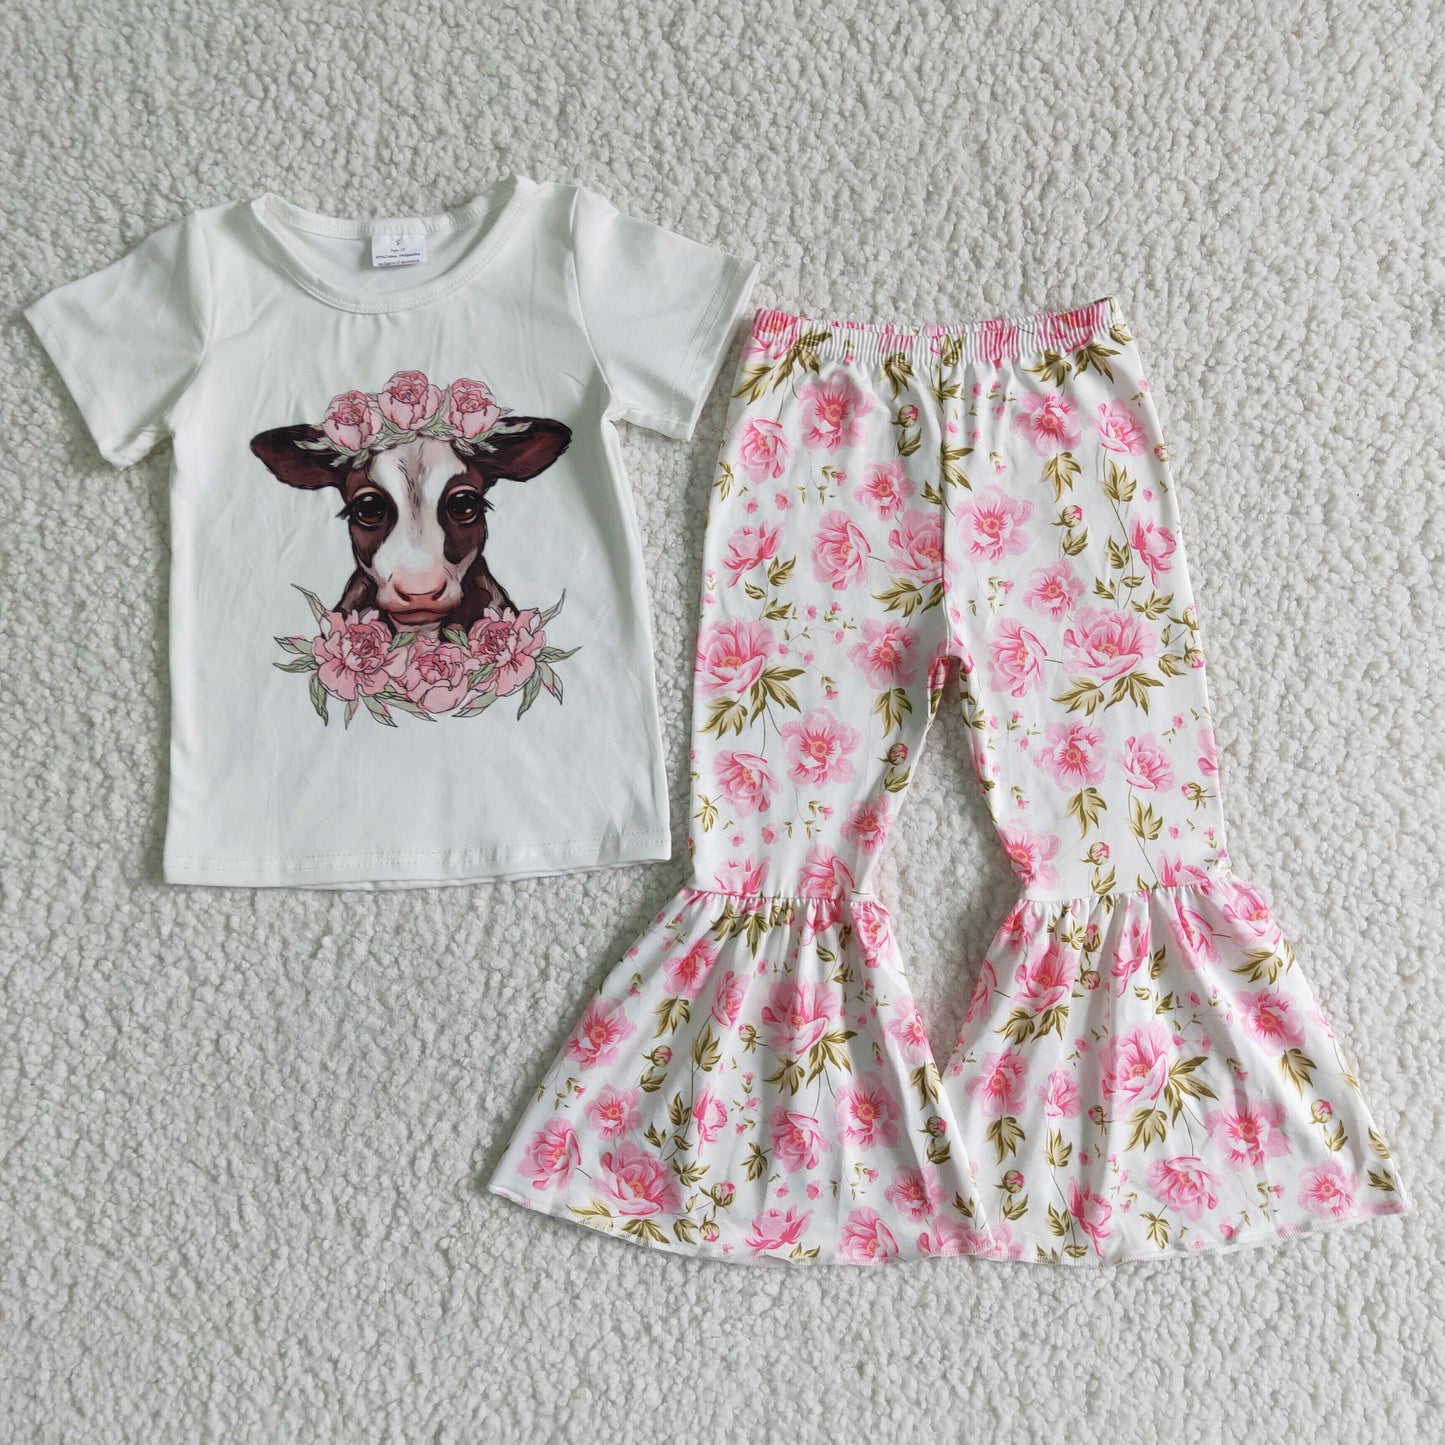 Girl Cow Floral Outfit